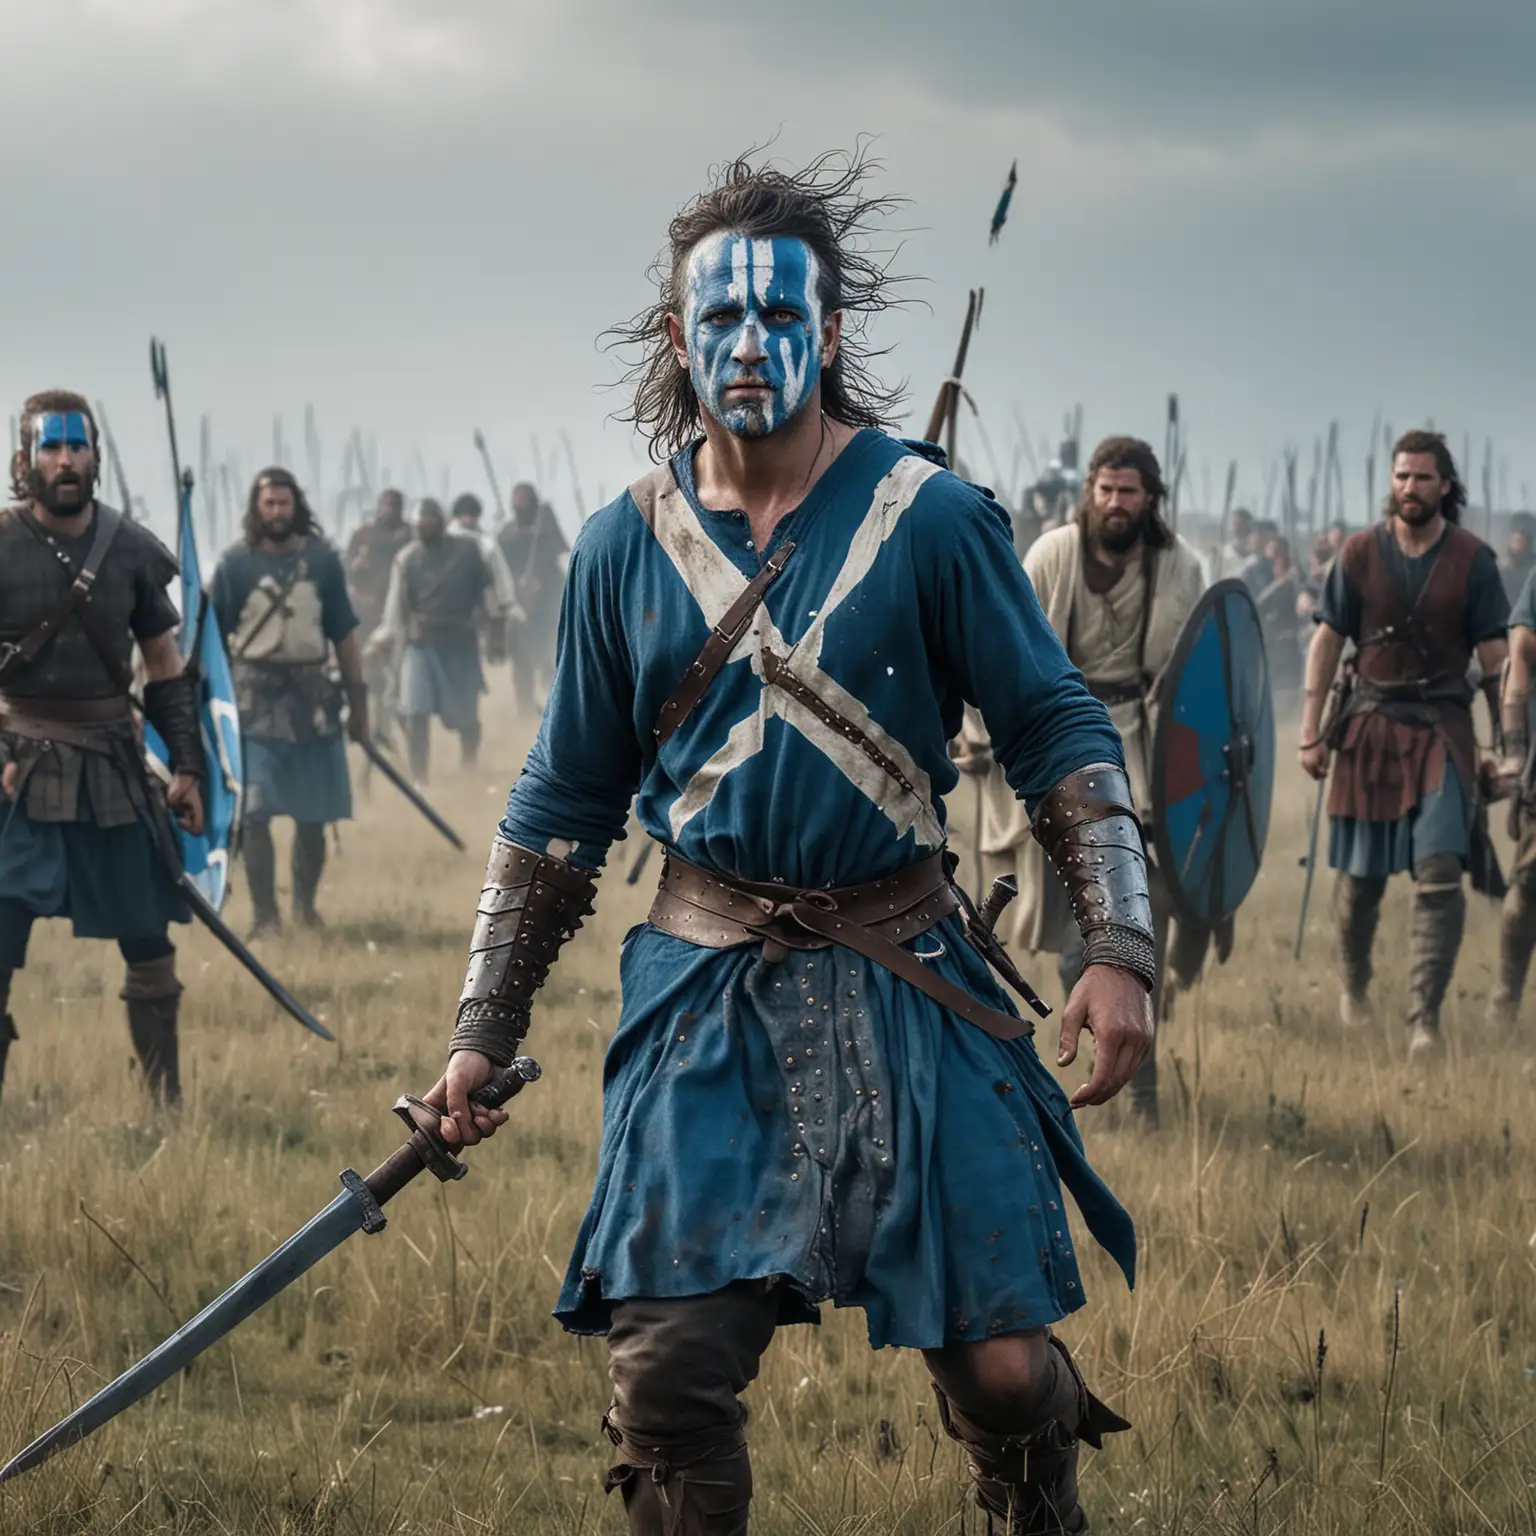 braveheart with white and blue warpaint in medieval battle across a field with men fighting in battle



